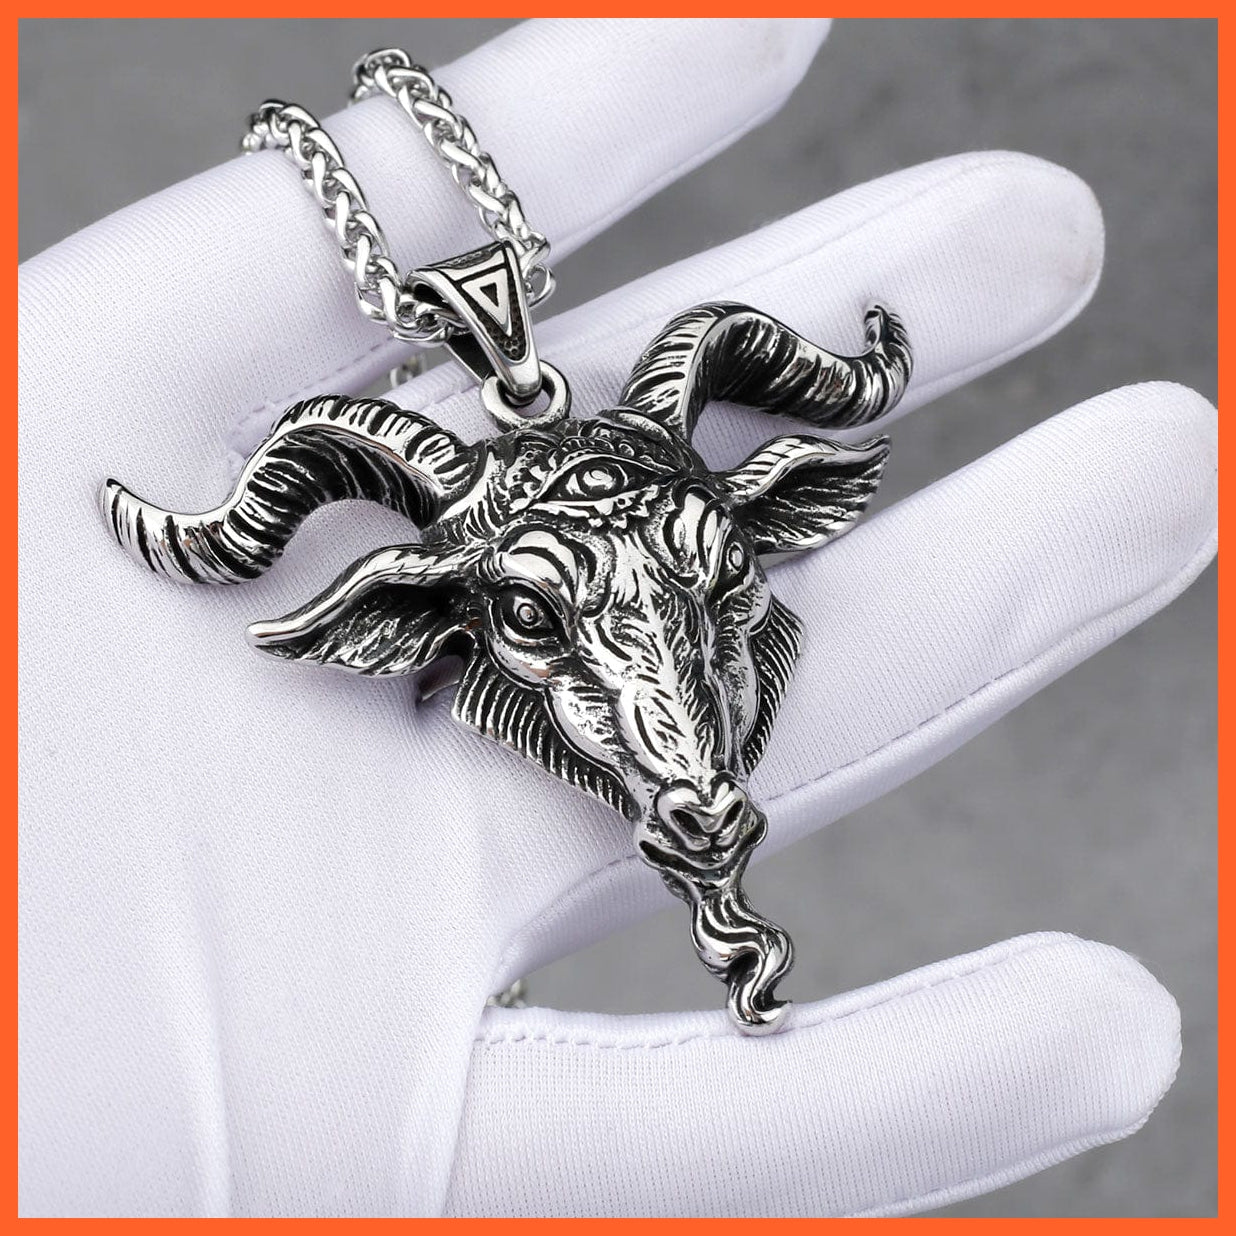 whatagift.uk pendant and chain Stainless Steel Lucifer Satan Ram Charm Pendant Necklace